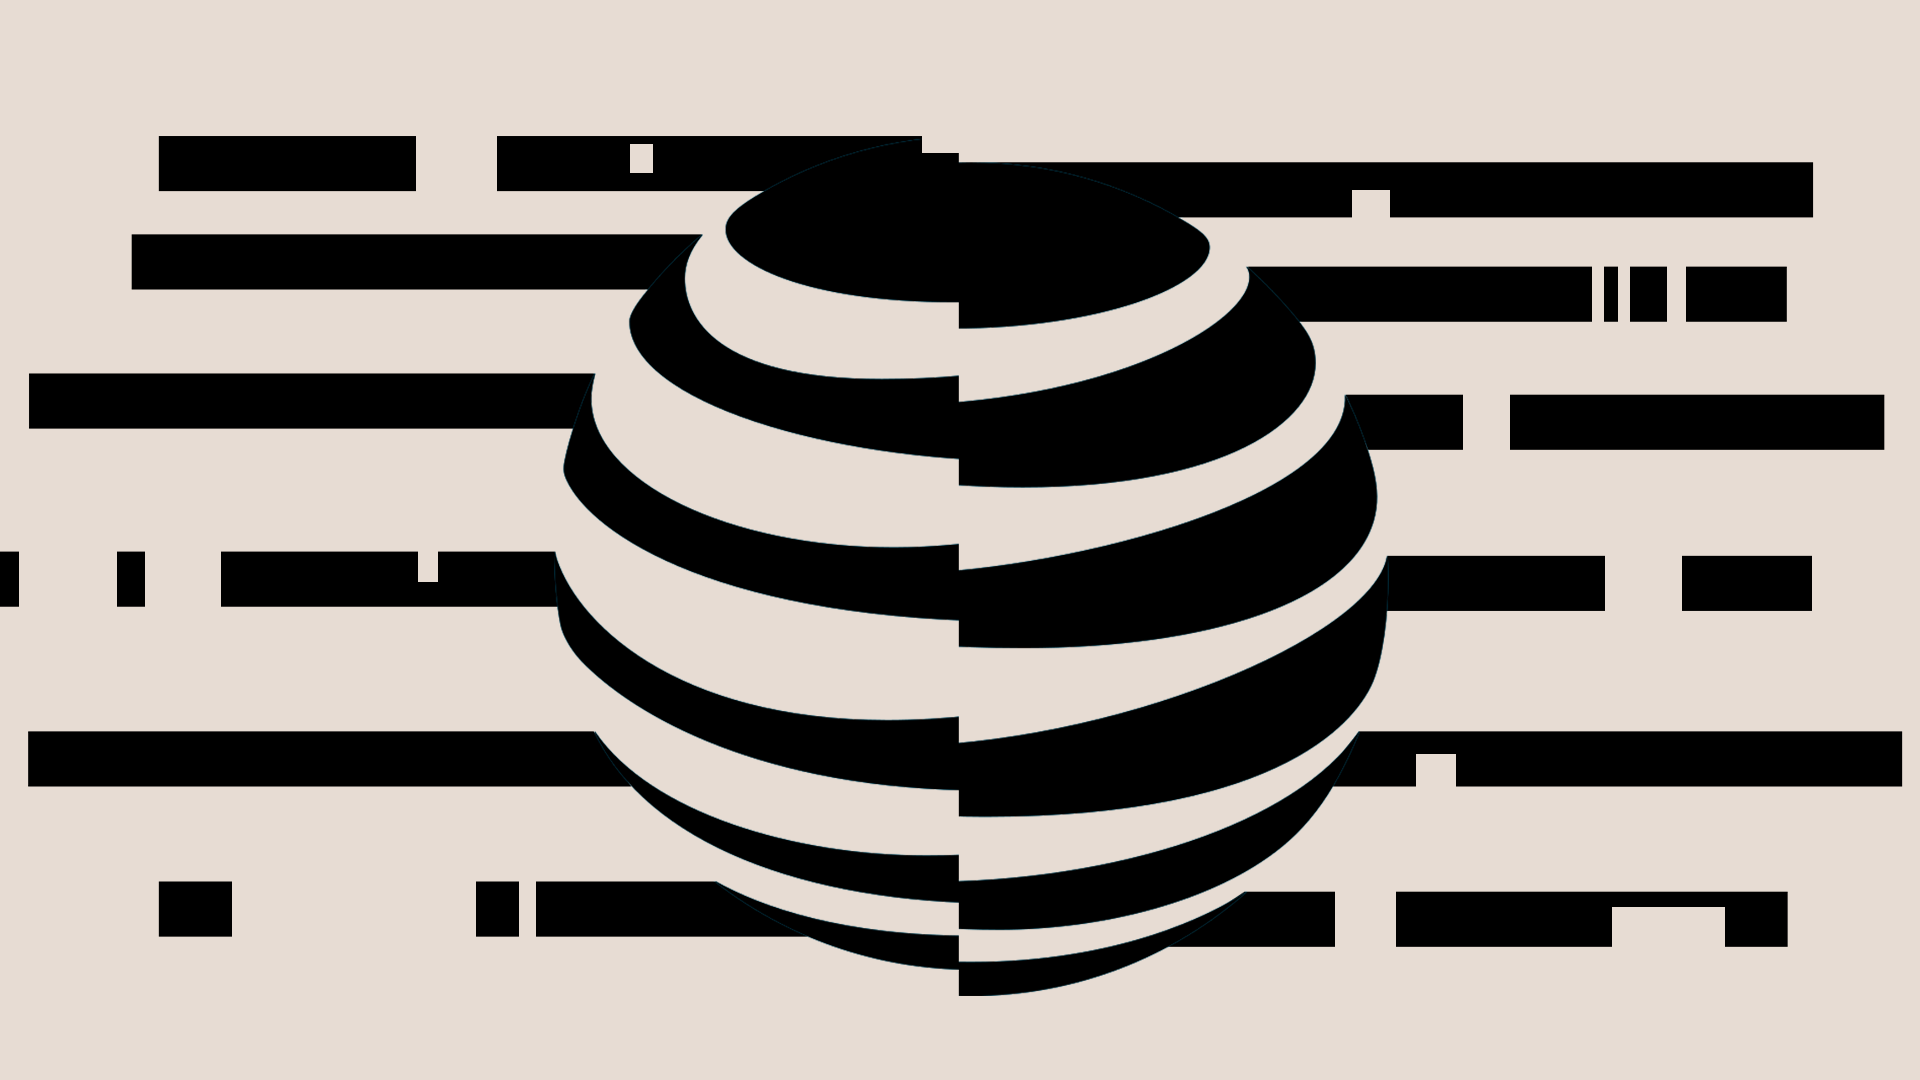 A graphic showing a mutated version of AT&T's logo